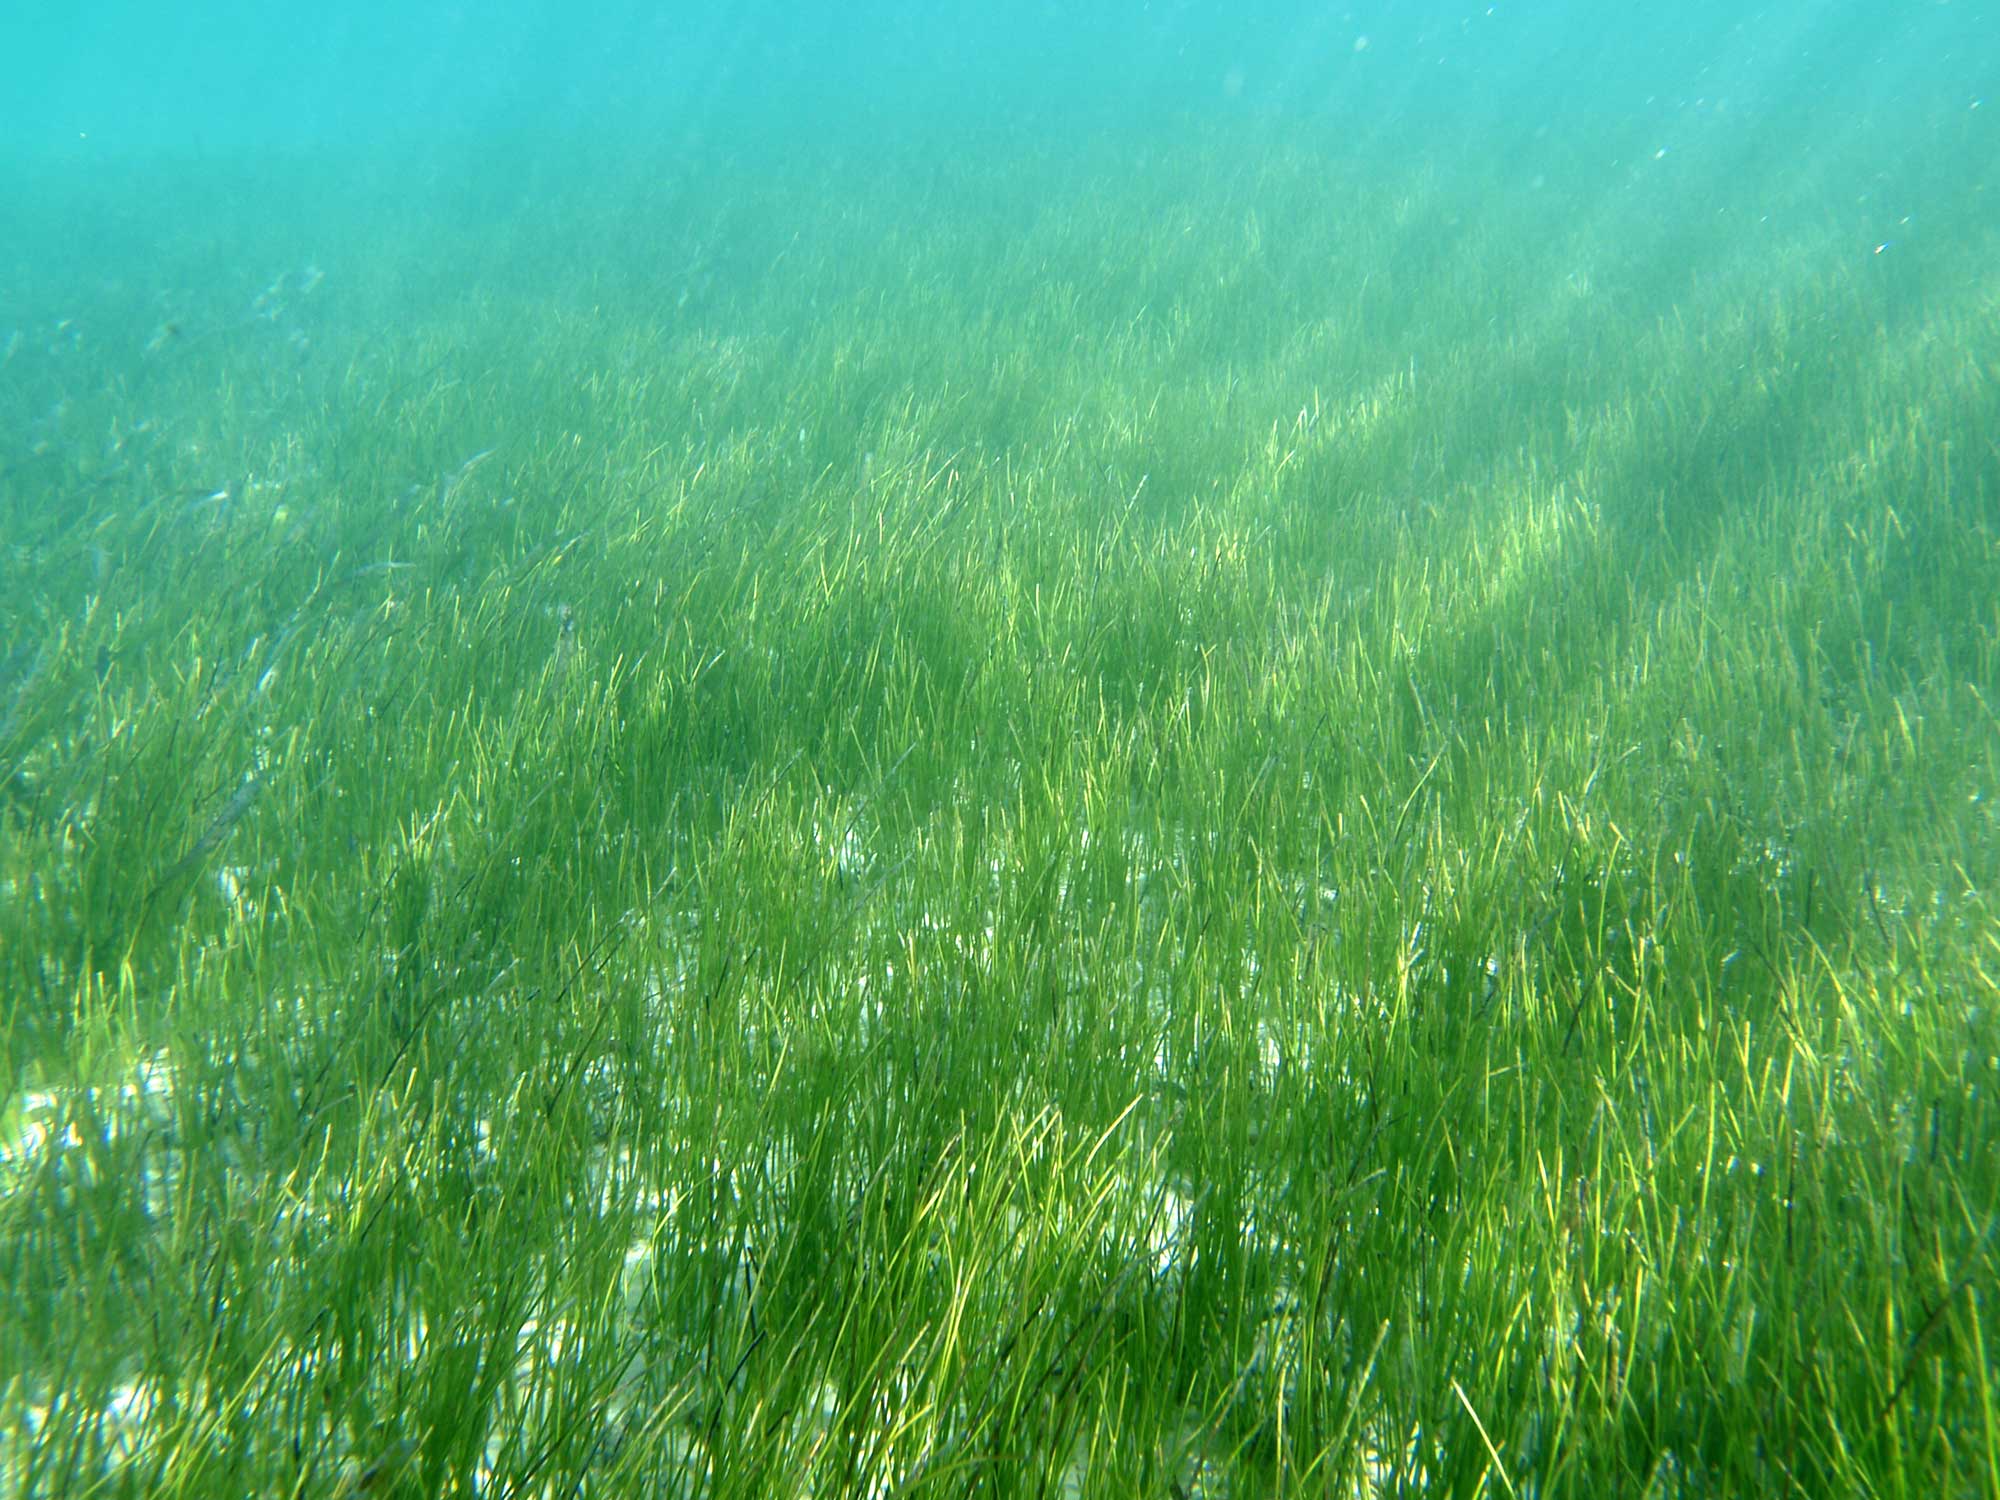 Could human pee save seagrass?